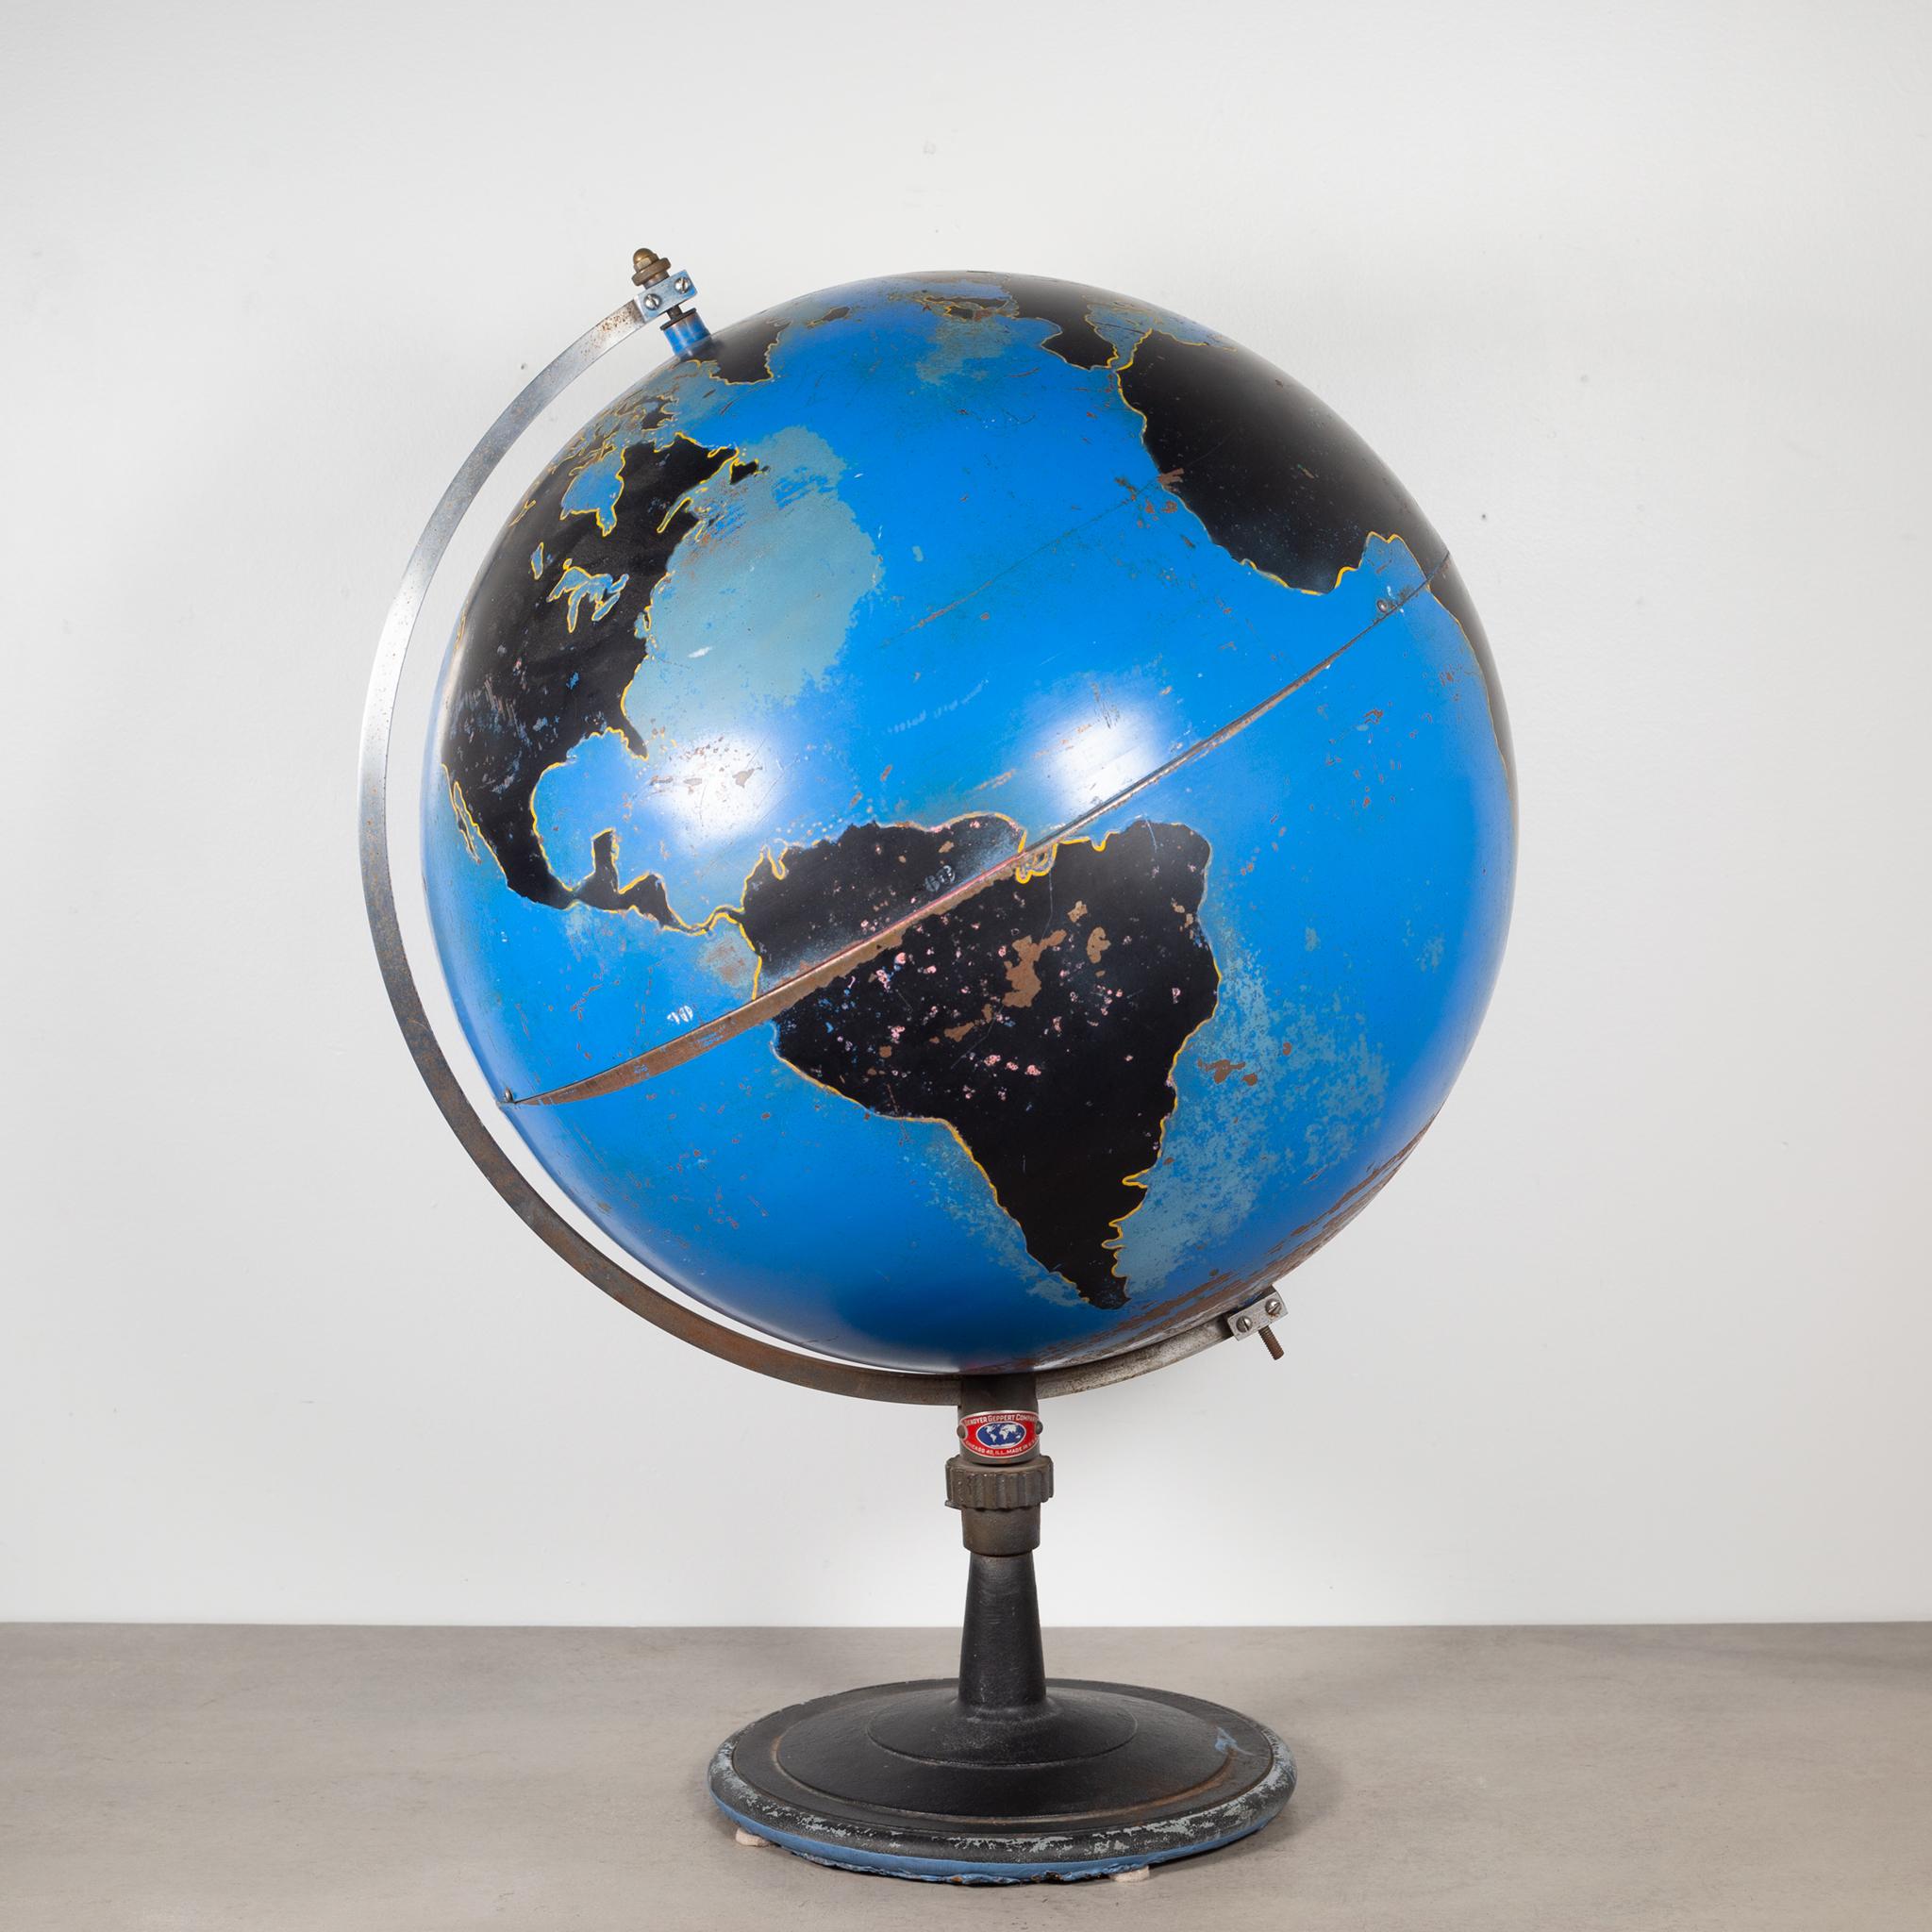 ABOUT


Contact us for a shipping quote: S16 Home San Francisco.

The Military Globe was used for campaign planning and became an important element of military academies. Composed of a spun metal blue orb with black slated land masses outlined in